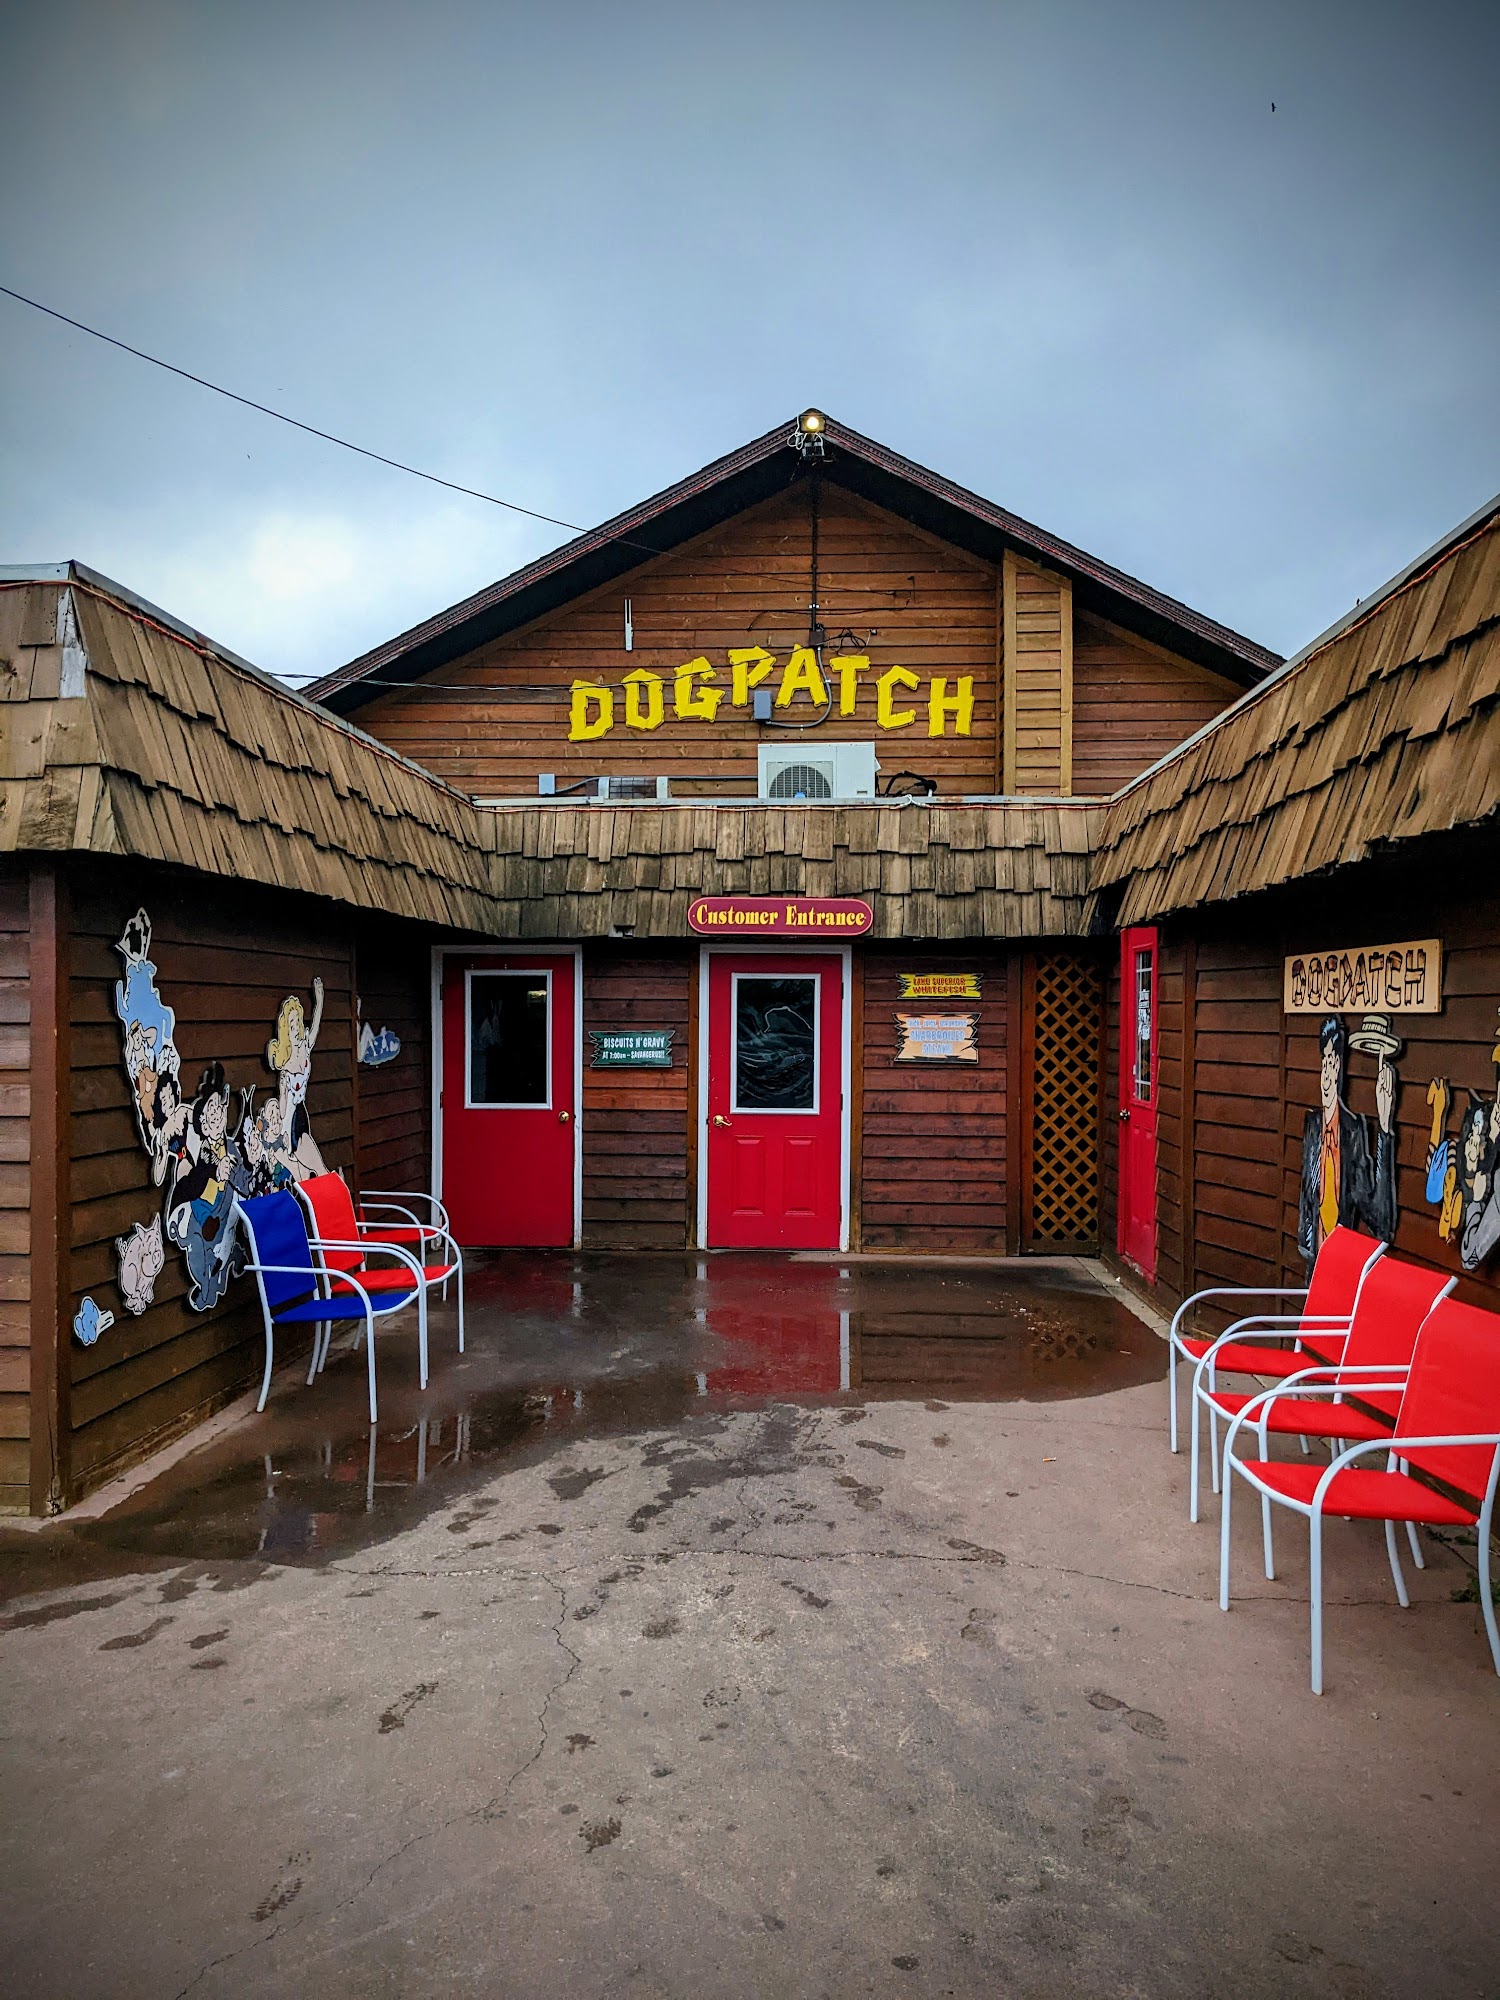 The Dogpatch Restaurant